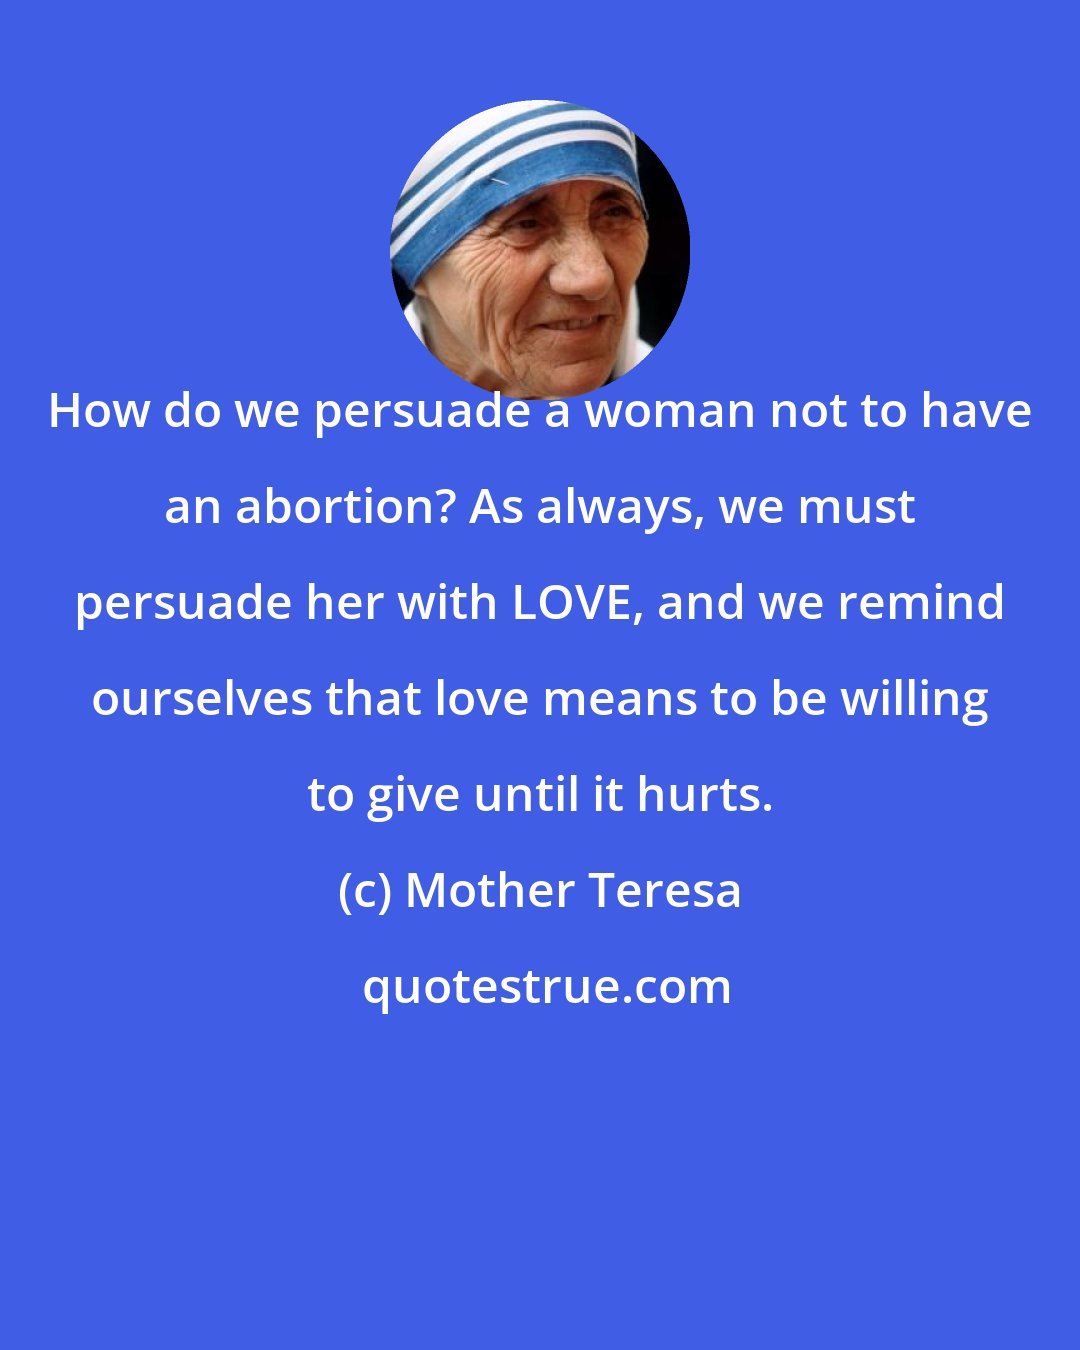 Mother Teresa: How do we persuade a woman not to have an abortion? As always, we must persuade her with LOVE, and we remind ourselves that love means to be willing to give until it hurts.